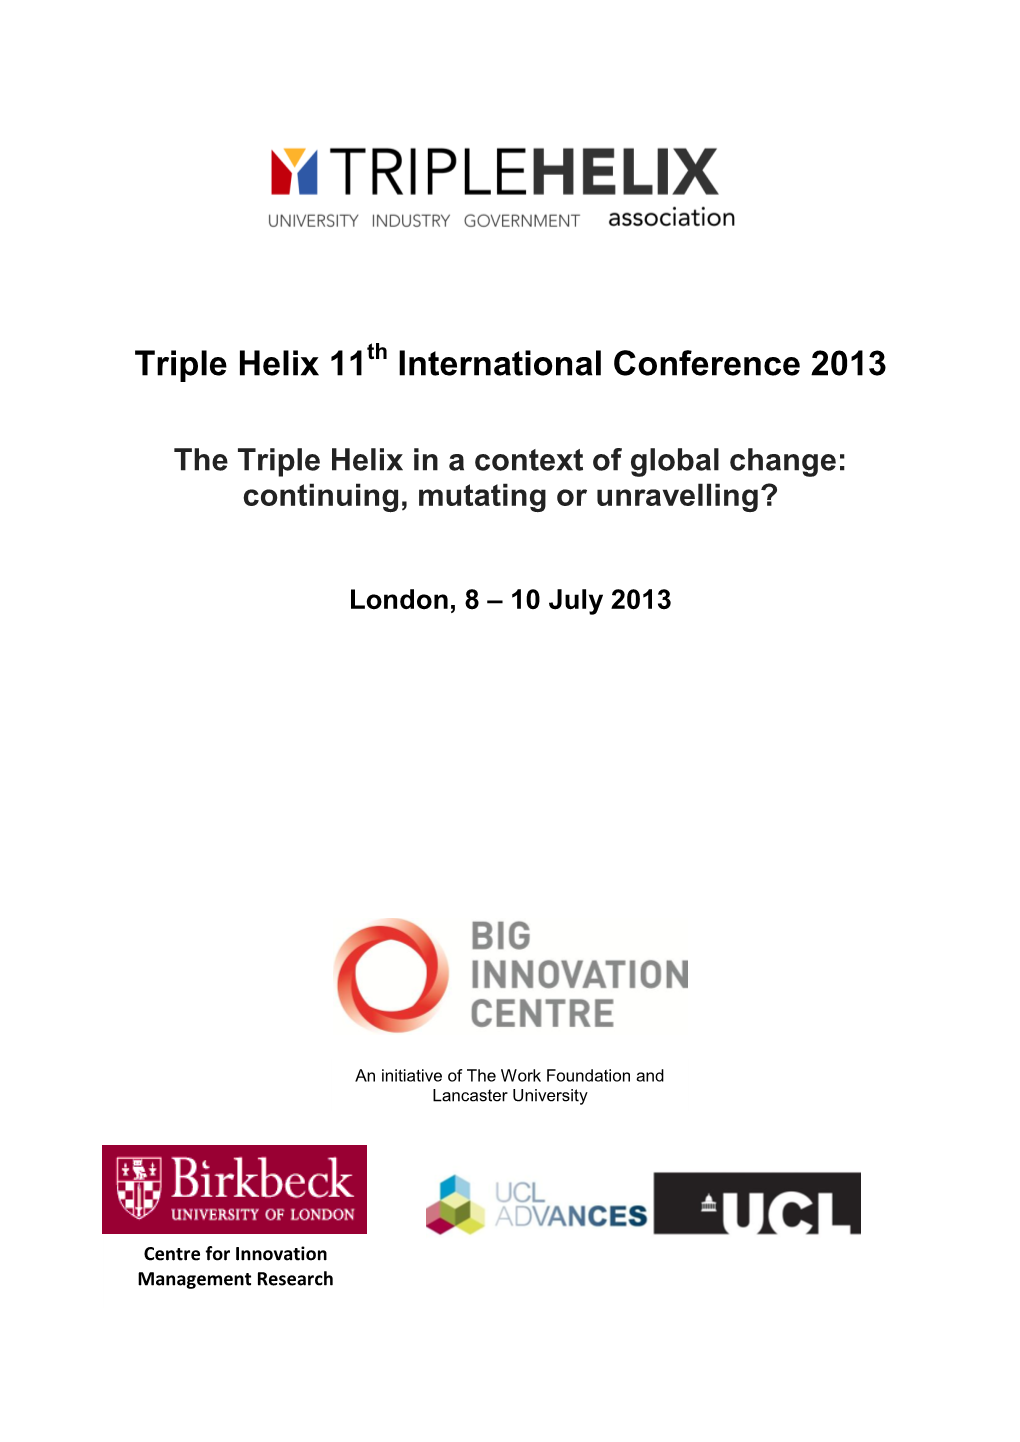 See the Conference Programme Here